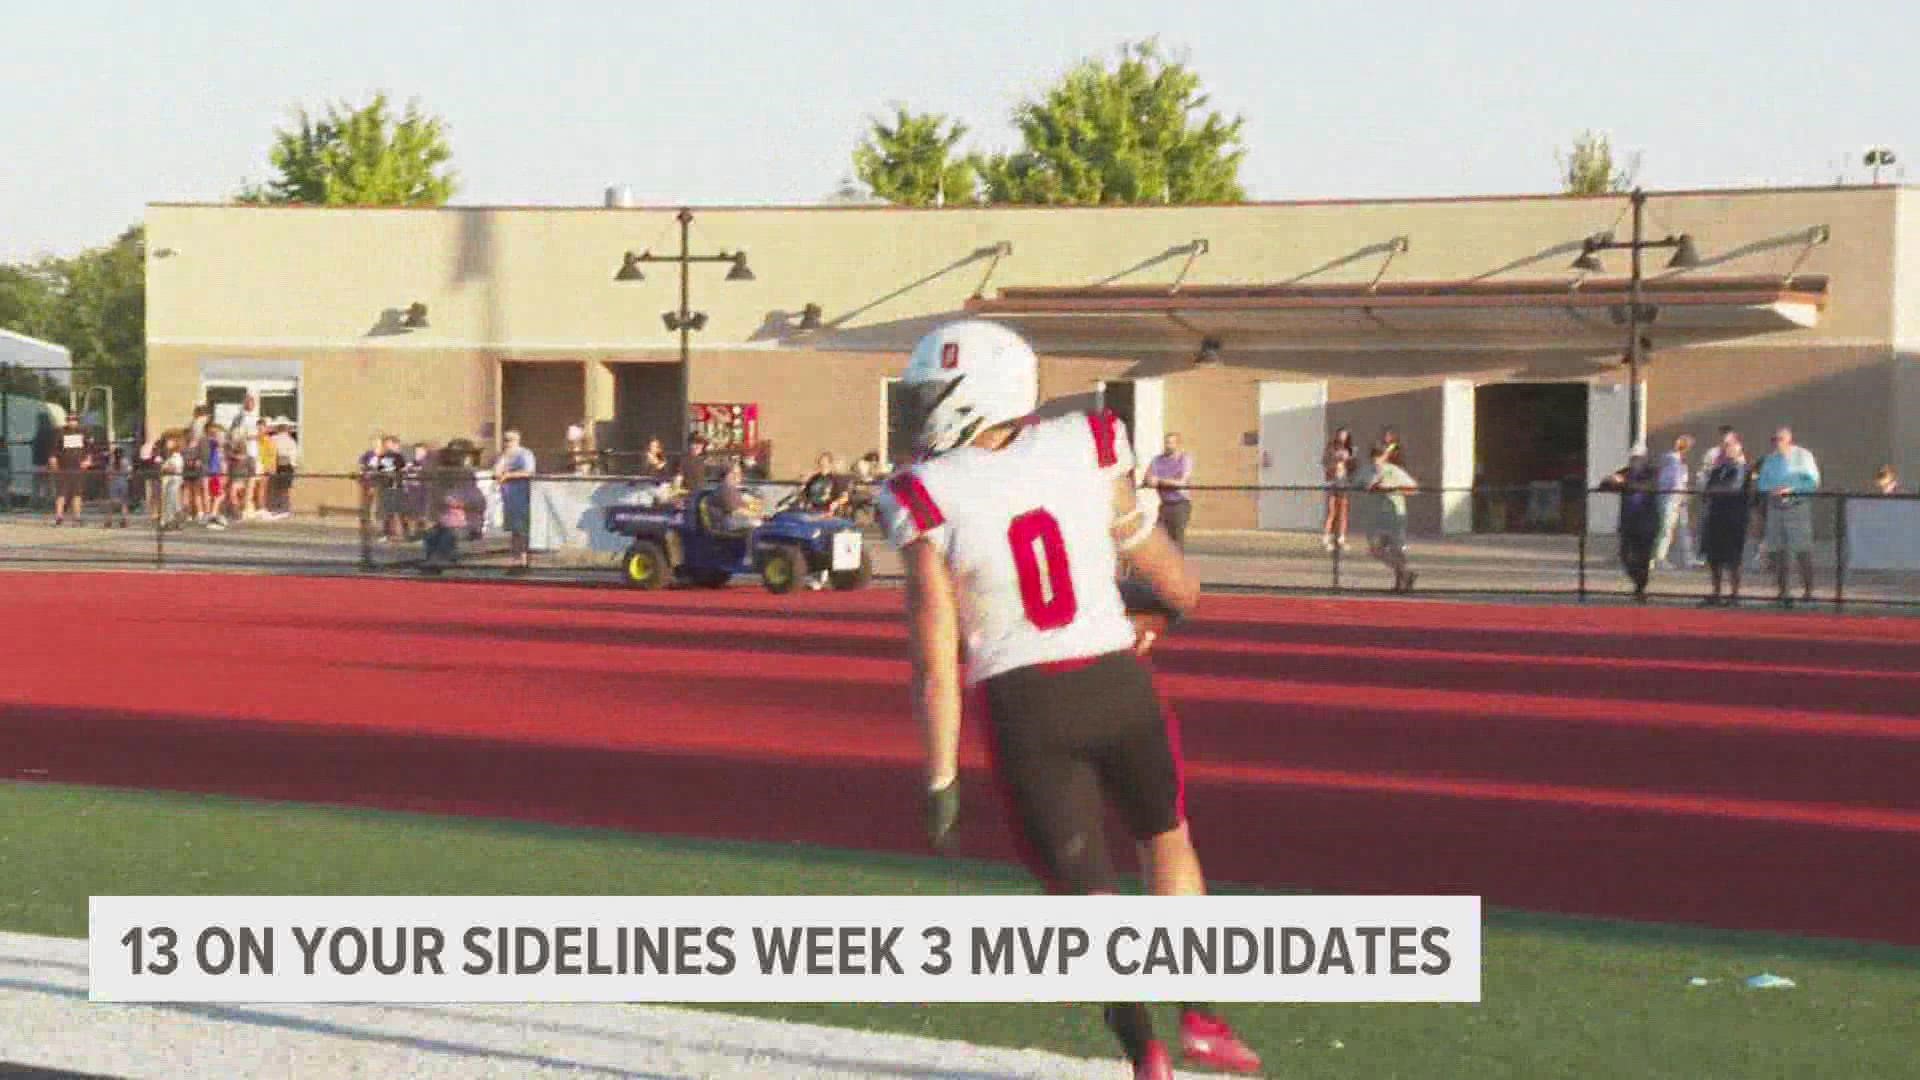 These four candidates had huge moments in week 3 of the high school football 2022 season, so make sure you cast your vote by Thursday to crown one of them MVP.